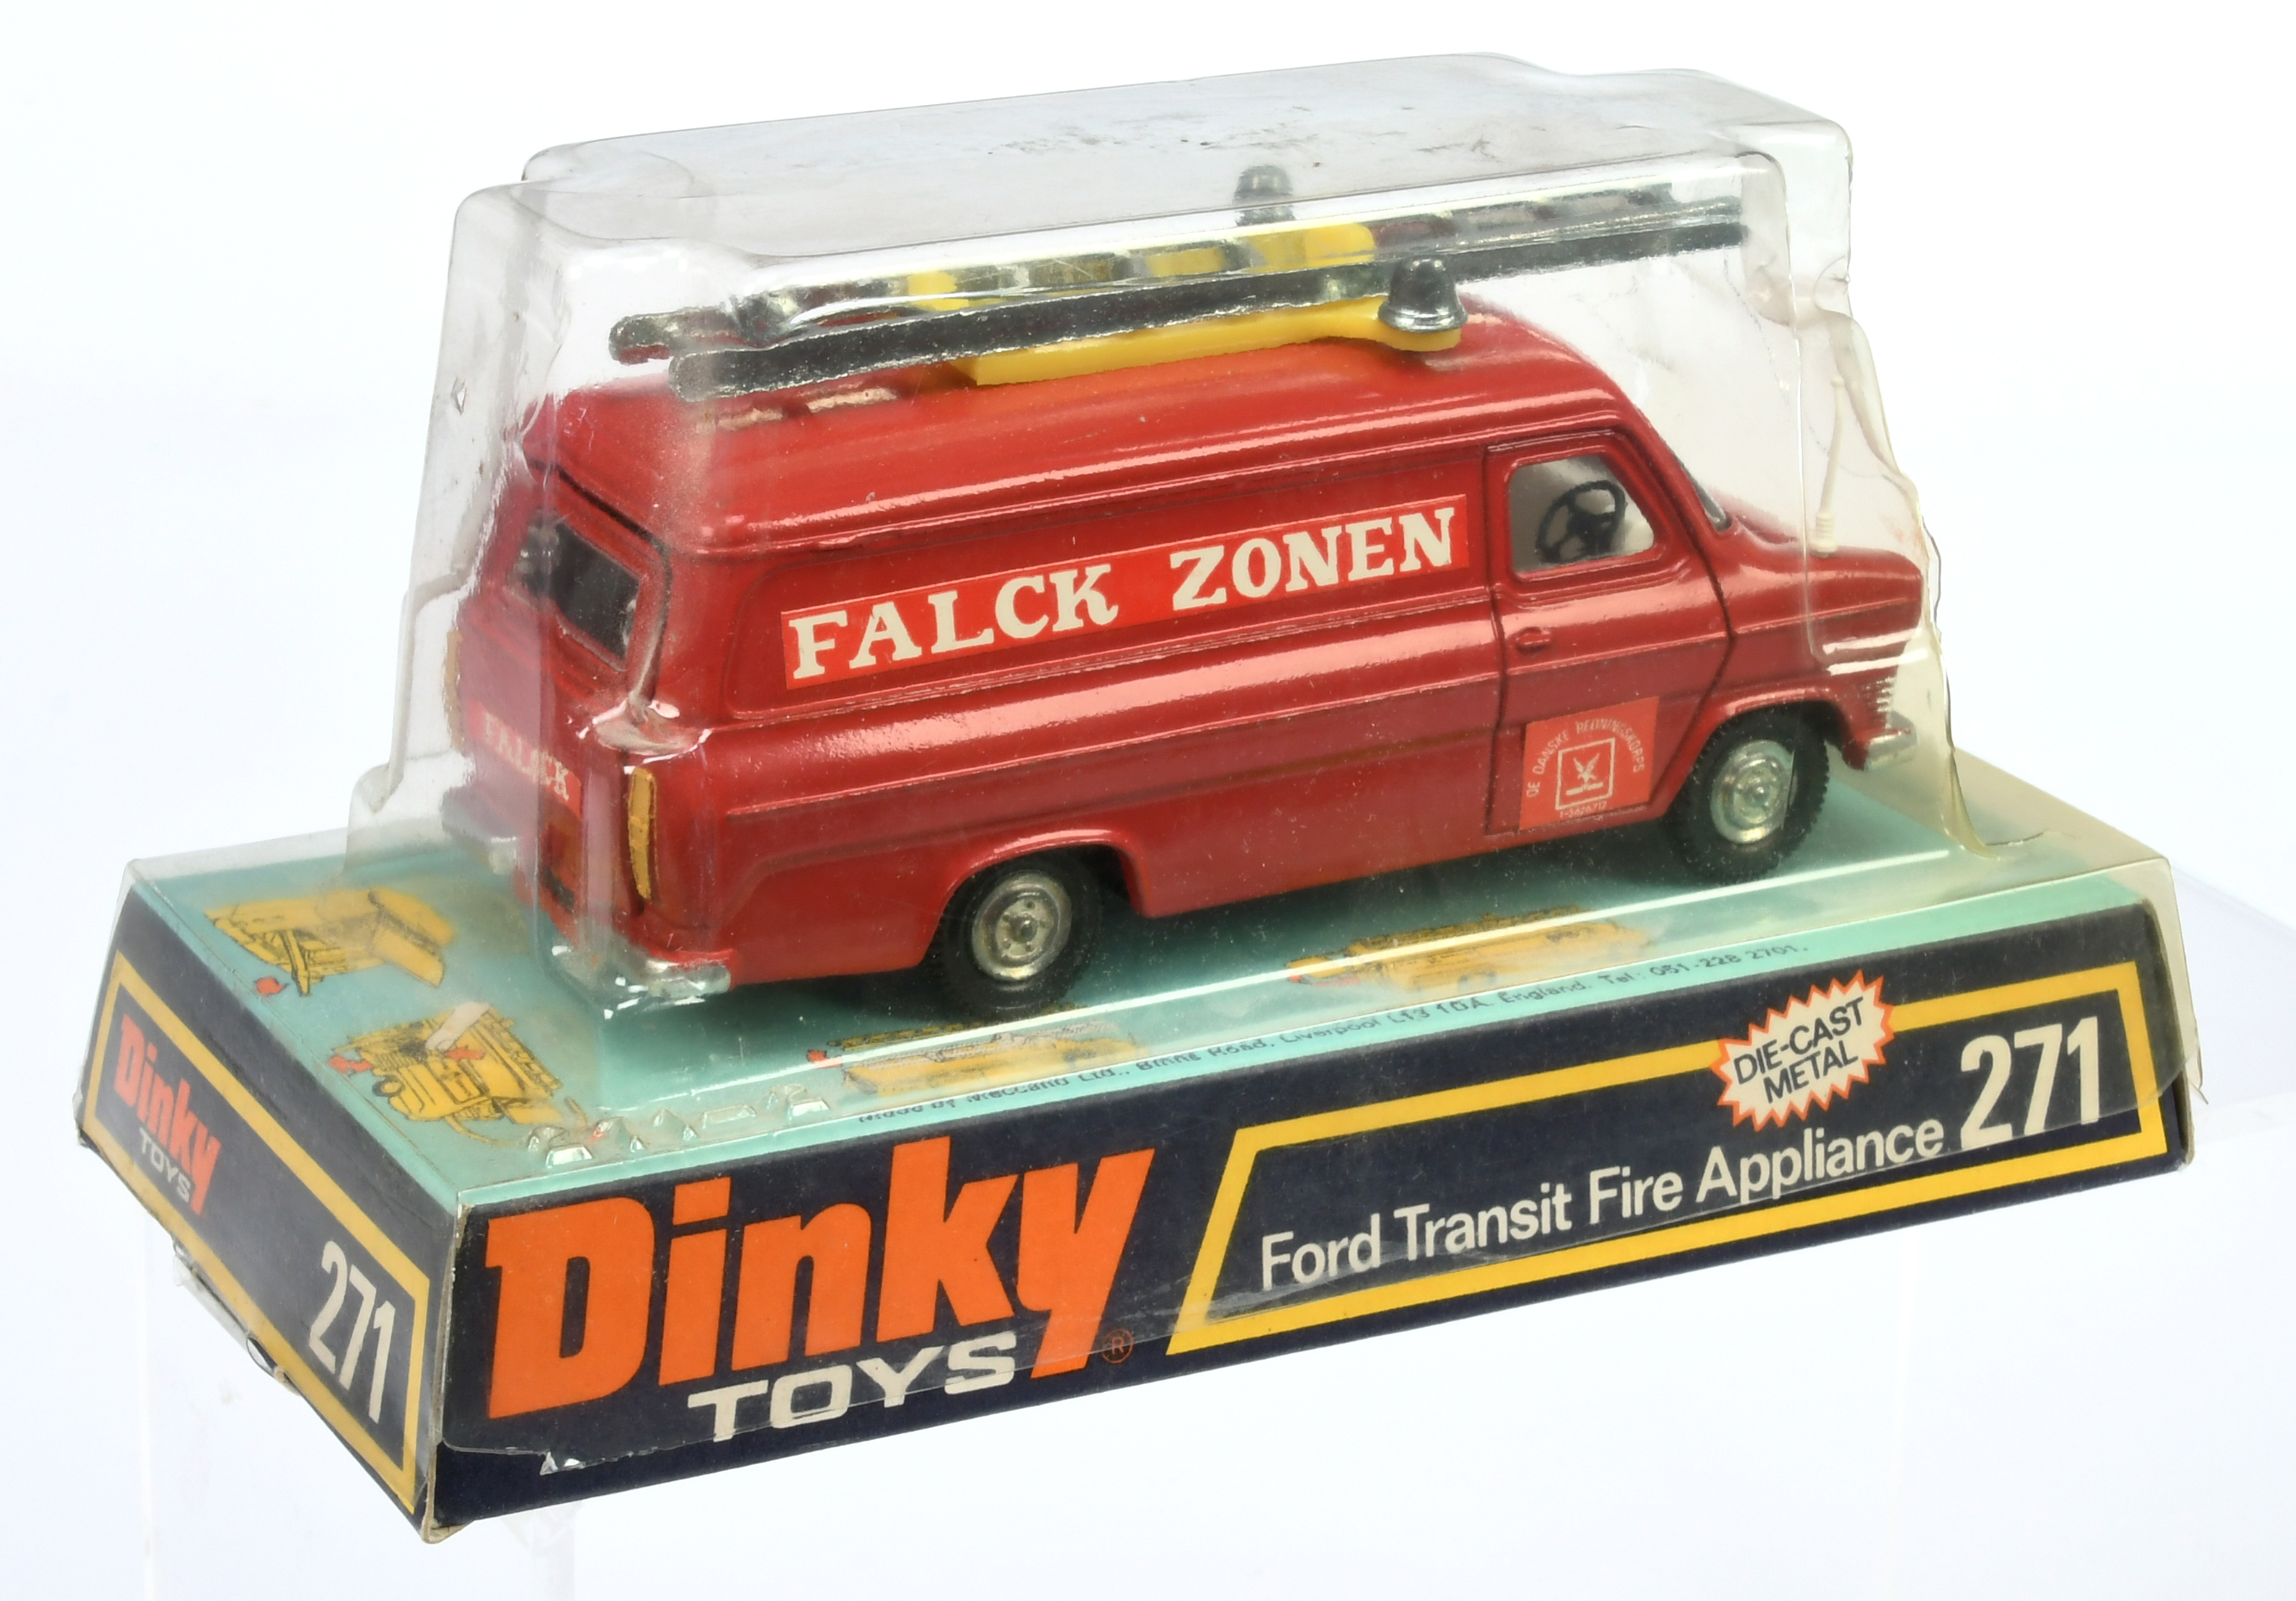 Dinky Toys 271 "Falck Zonen" Ford Transit Van - Red body, white interior and plastic aerial, blac... - Image 2 of 2